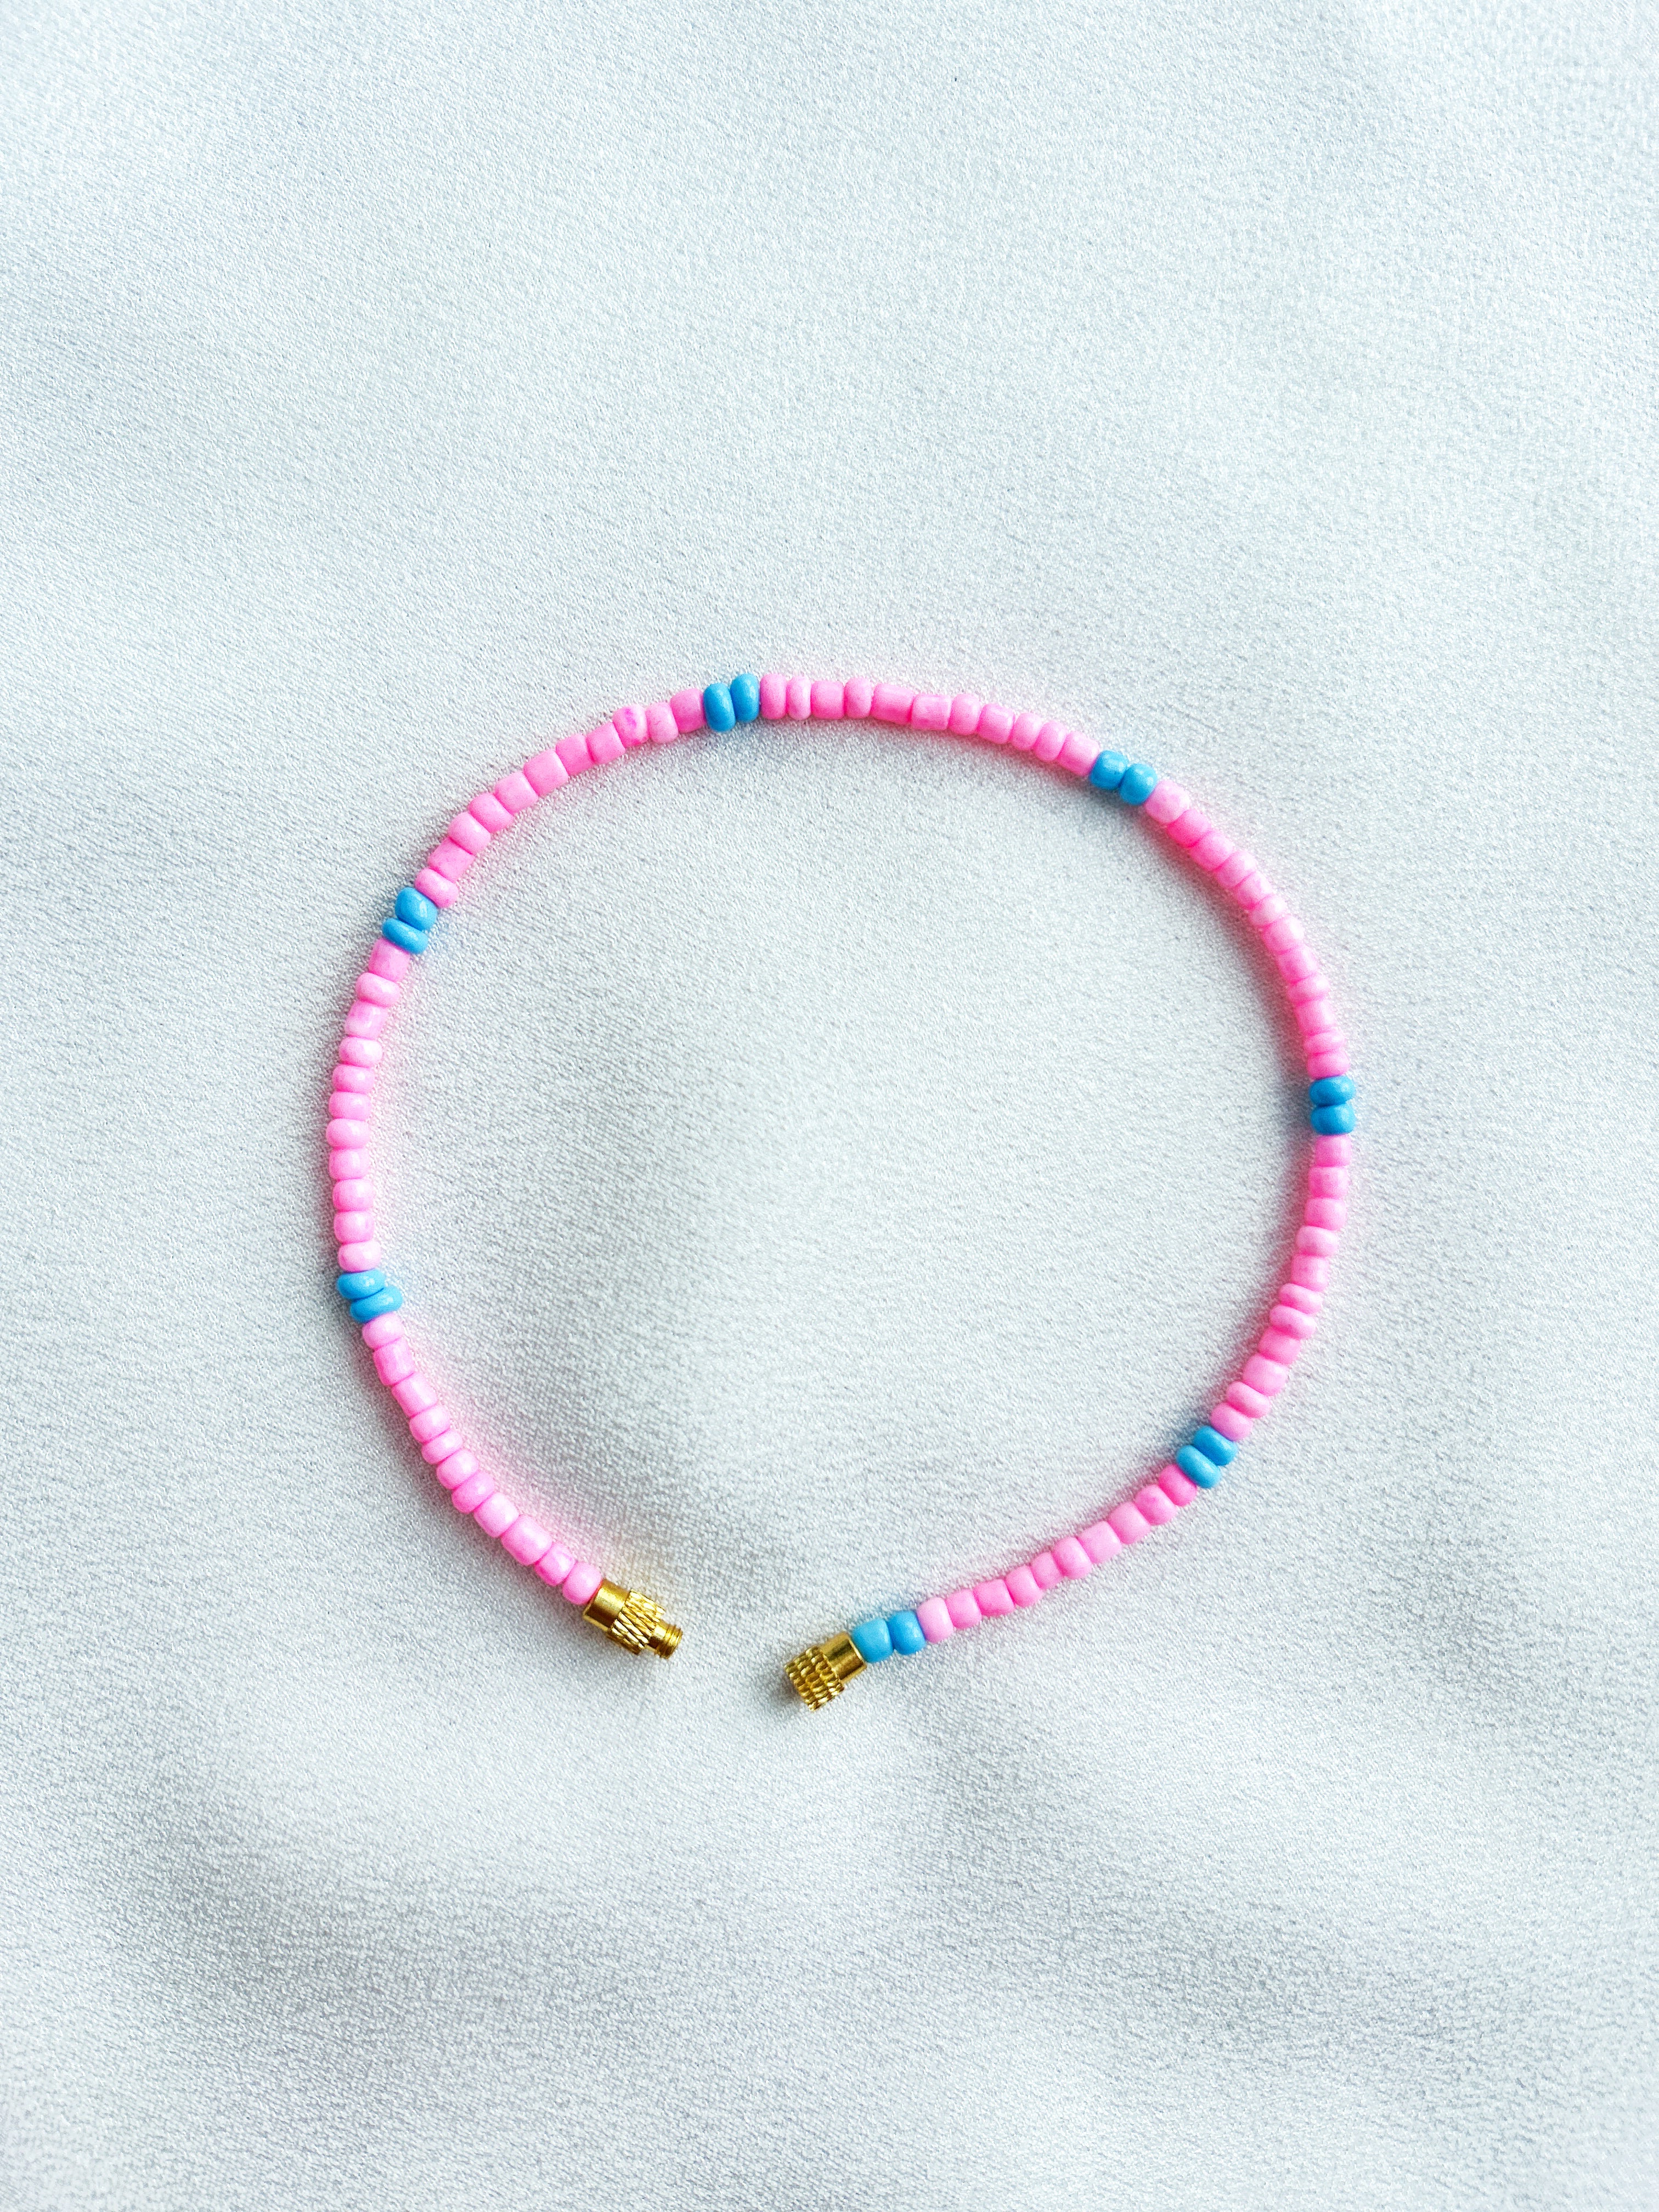 [THE ELEVEN] Anklet/Bracelet: Pink/Blue [Small Beads]